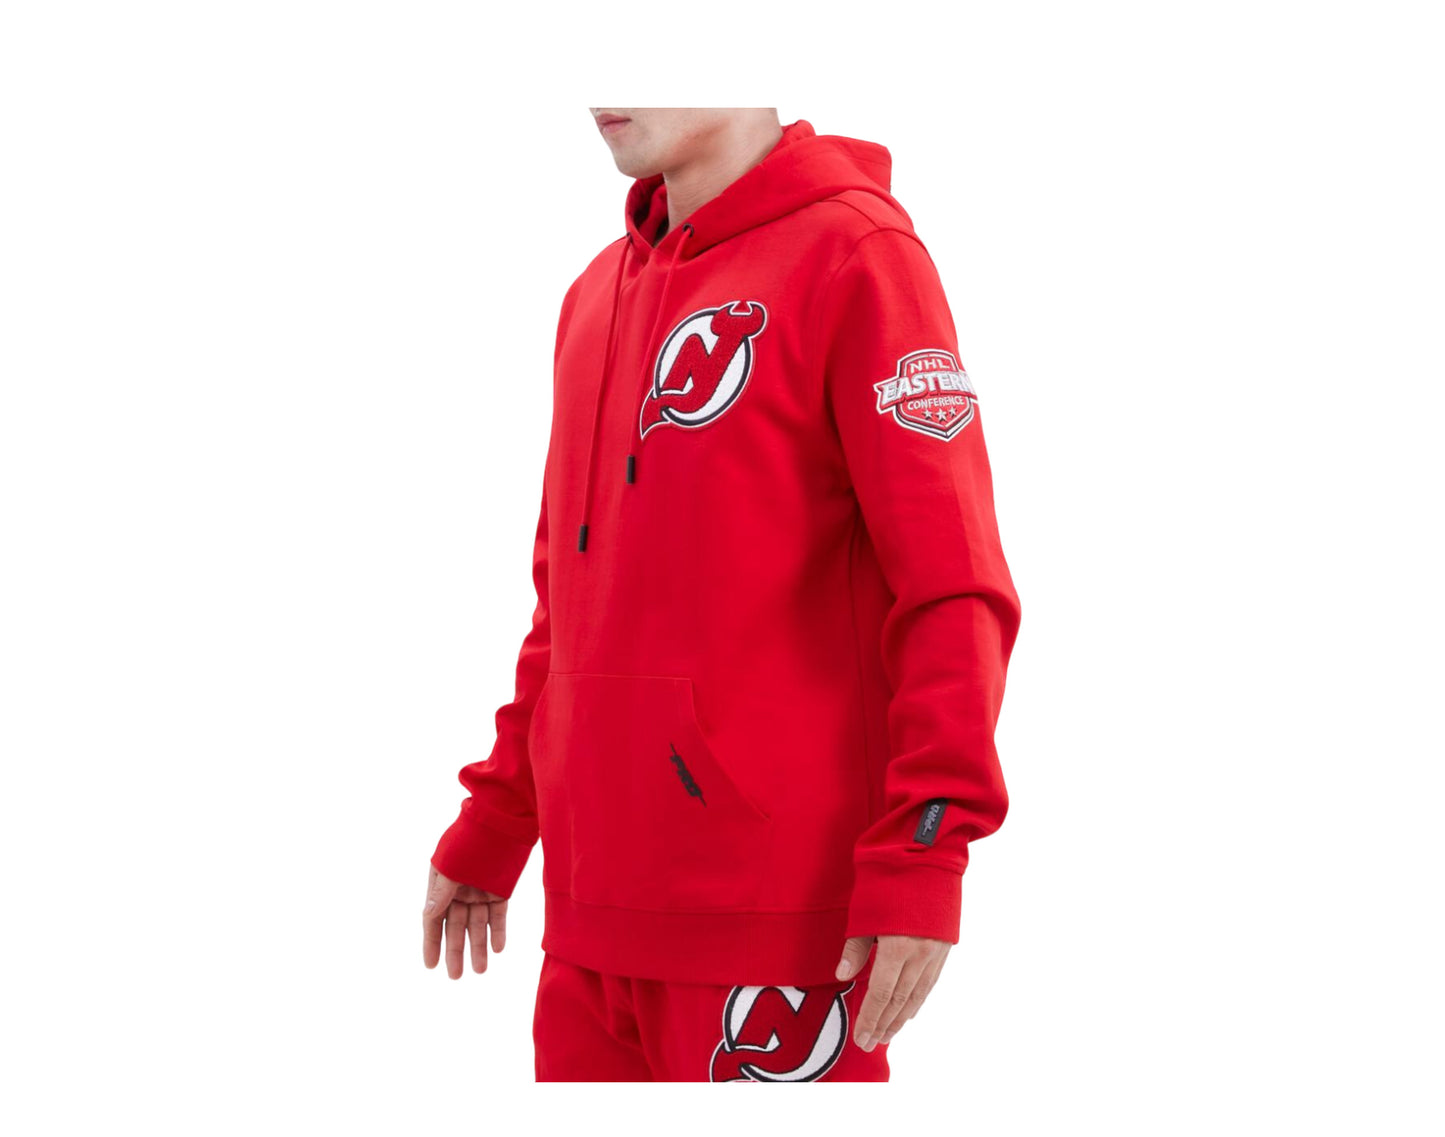 Pro Standard NHL New Jersey Devils Classic Pull-Over Men's Hoodie